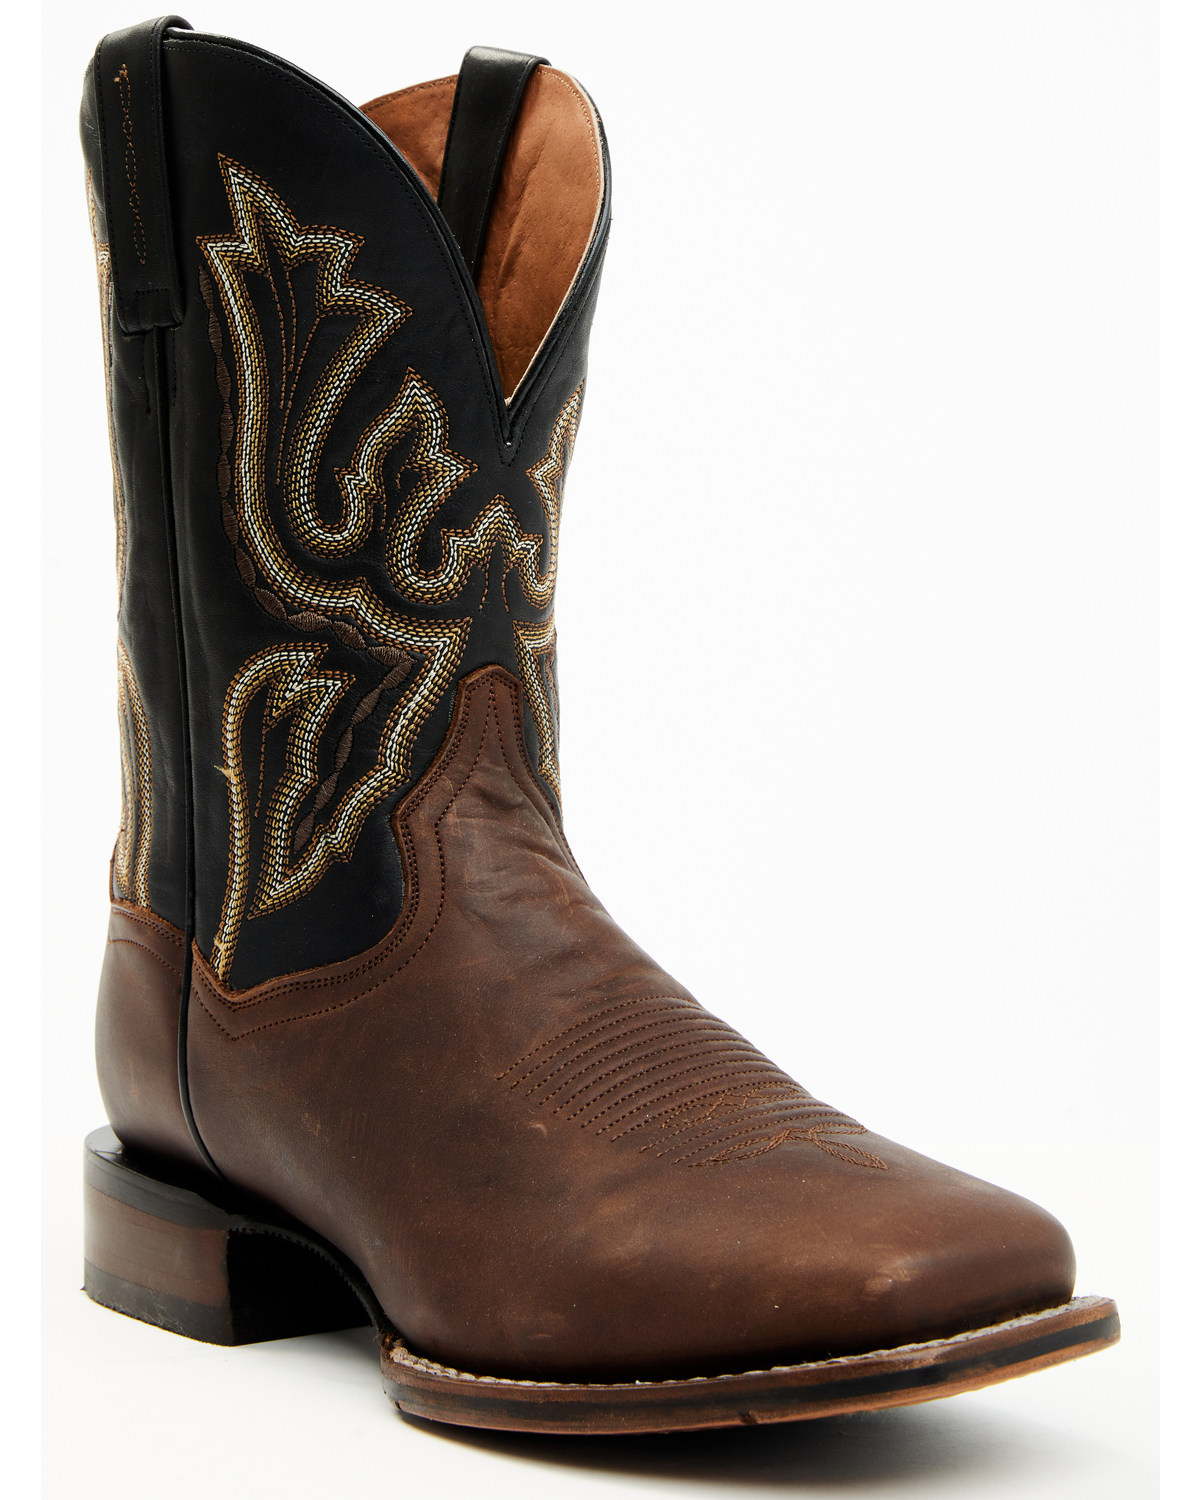 Dan Post Men's 11" Imperial Cowboy Certified Western Performance Boots - Broad Square Toe